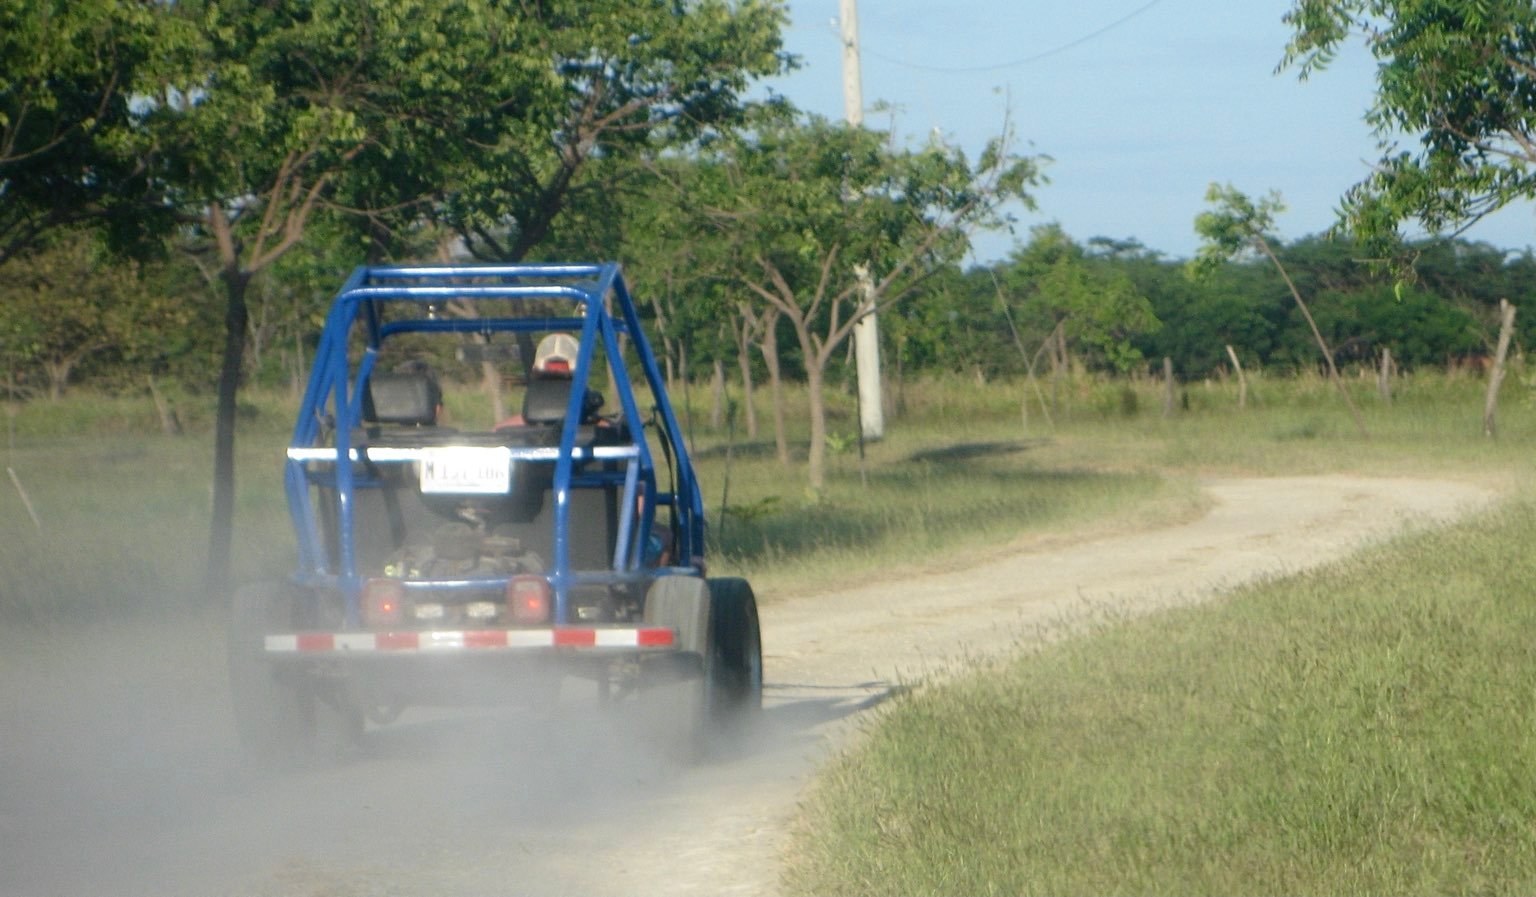 View of the buggy from behind, with a small dust cloud in its wake.